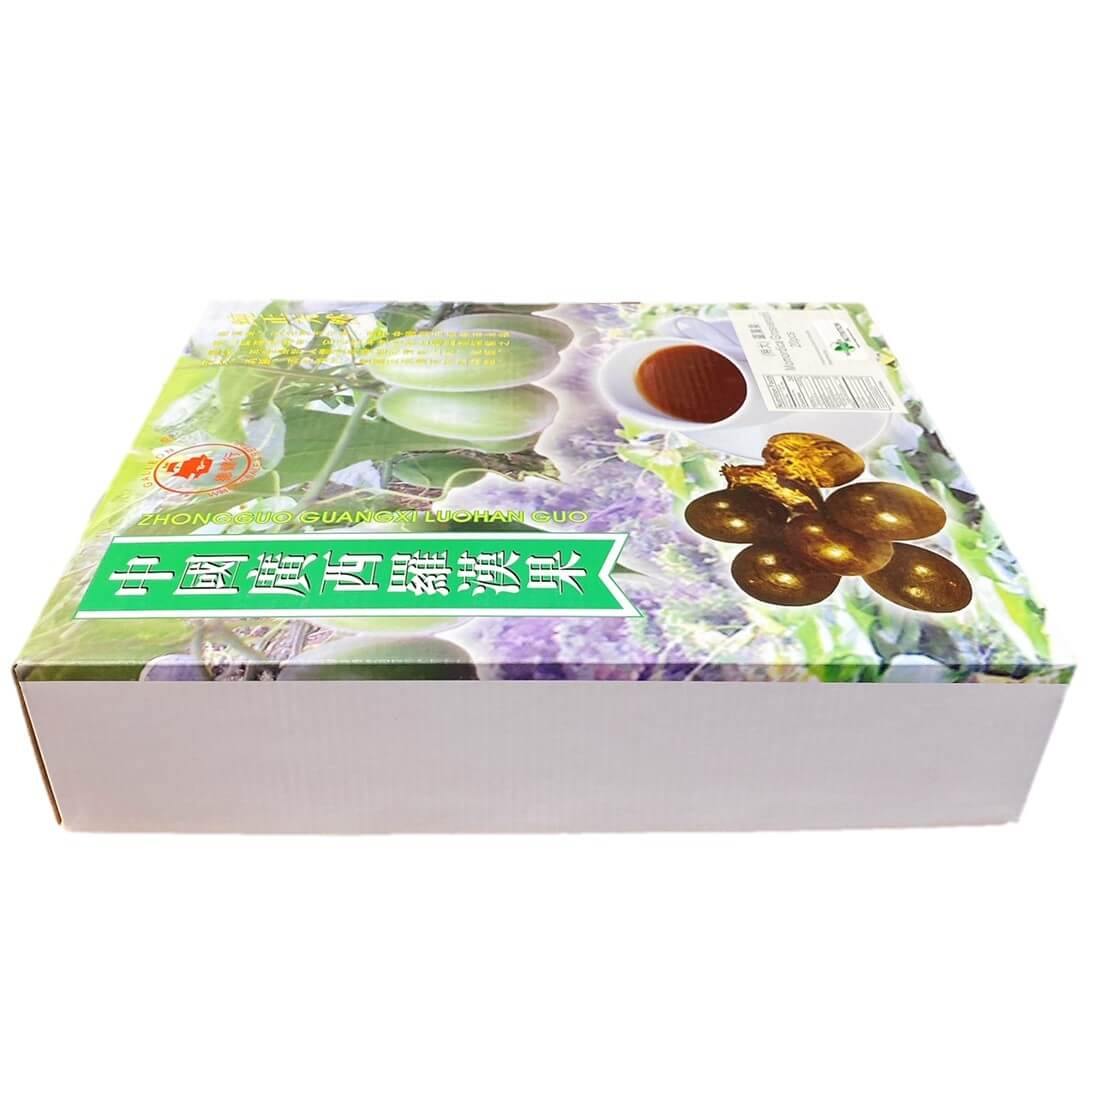 Premium Dried Luo Han Guo, Monk Fruit, Extra Large Size (20 Pieces) - Buy at New Green Nutrition